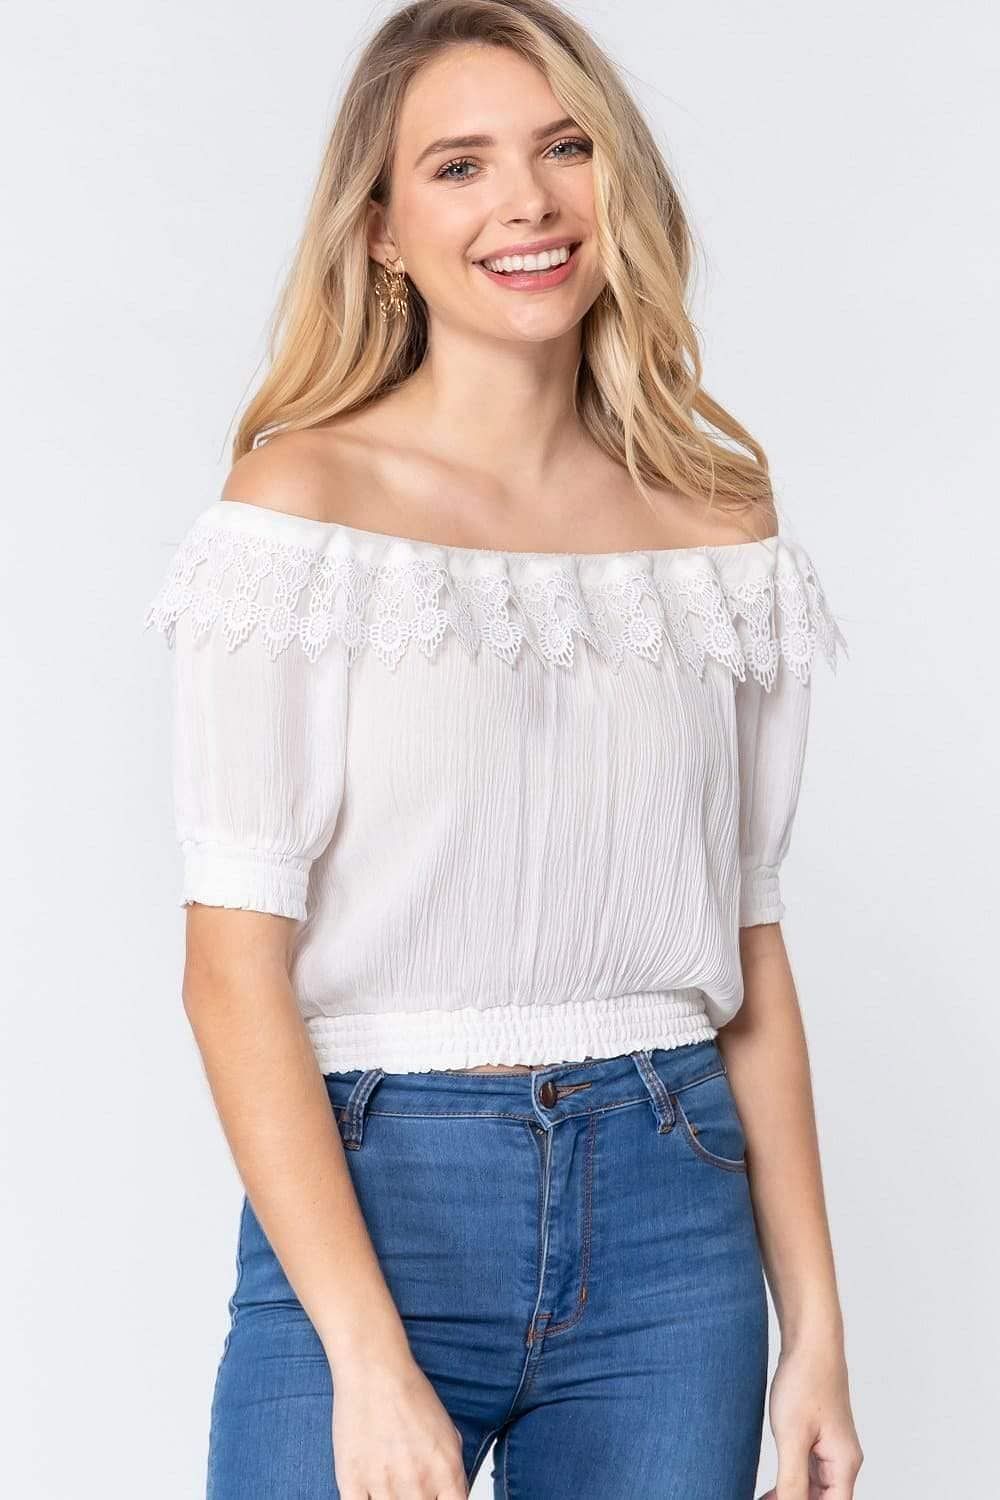 Off-White Off-The-Shoulder Ruffle Top - Shopping Therapy S Top